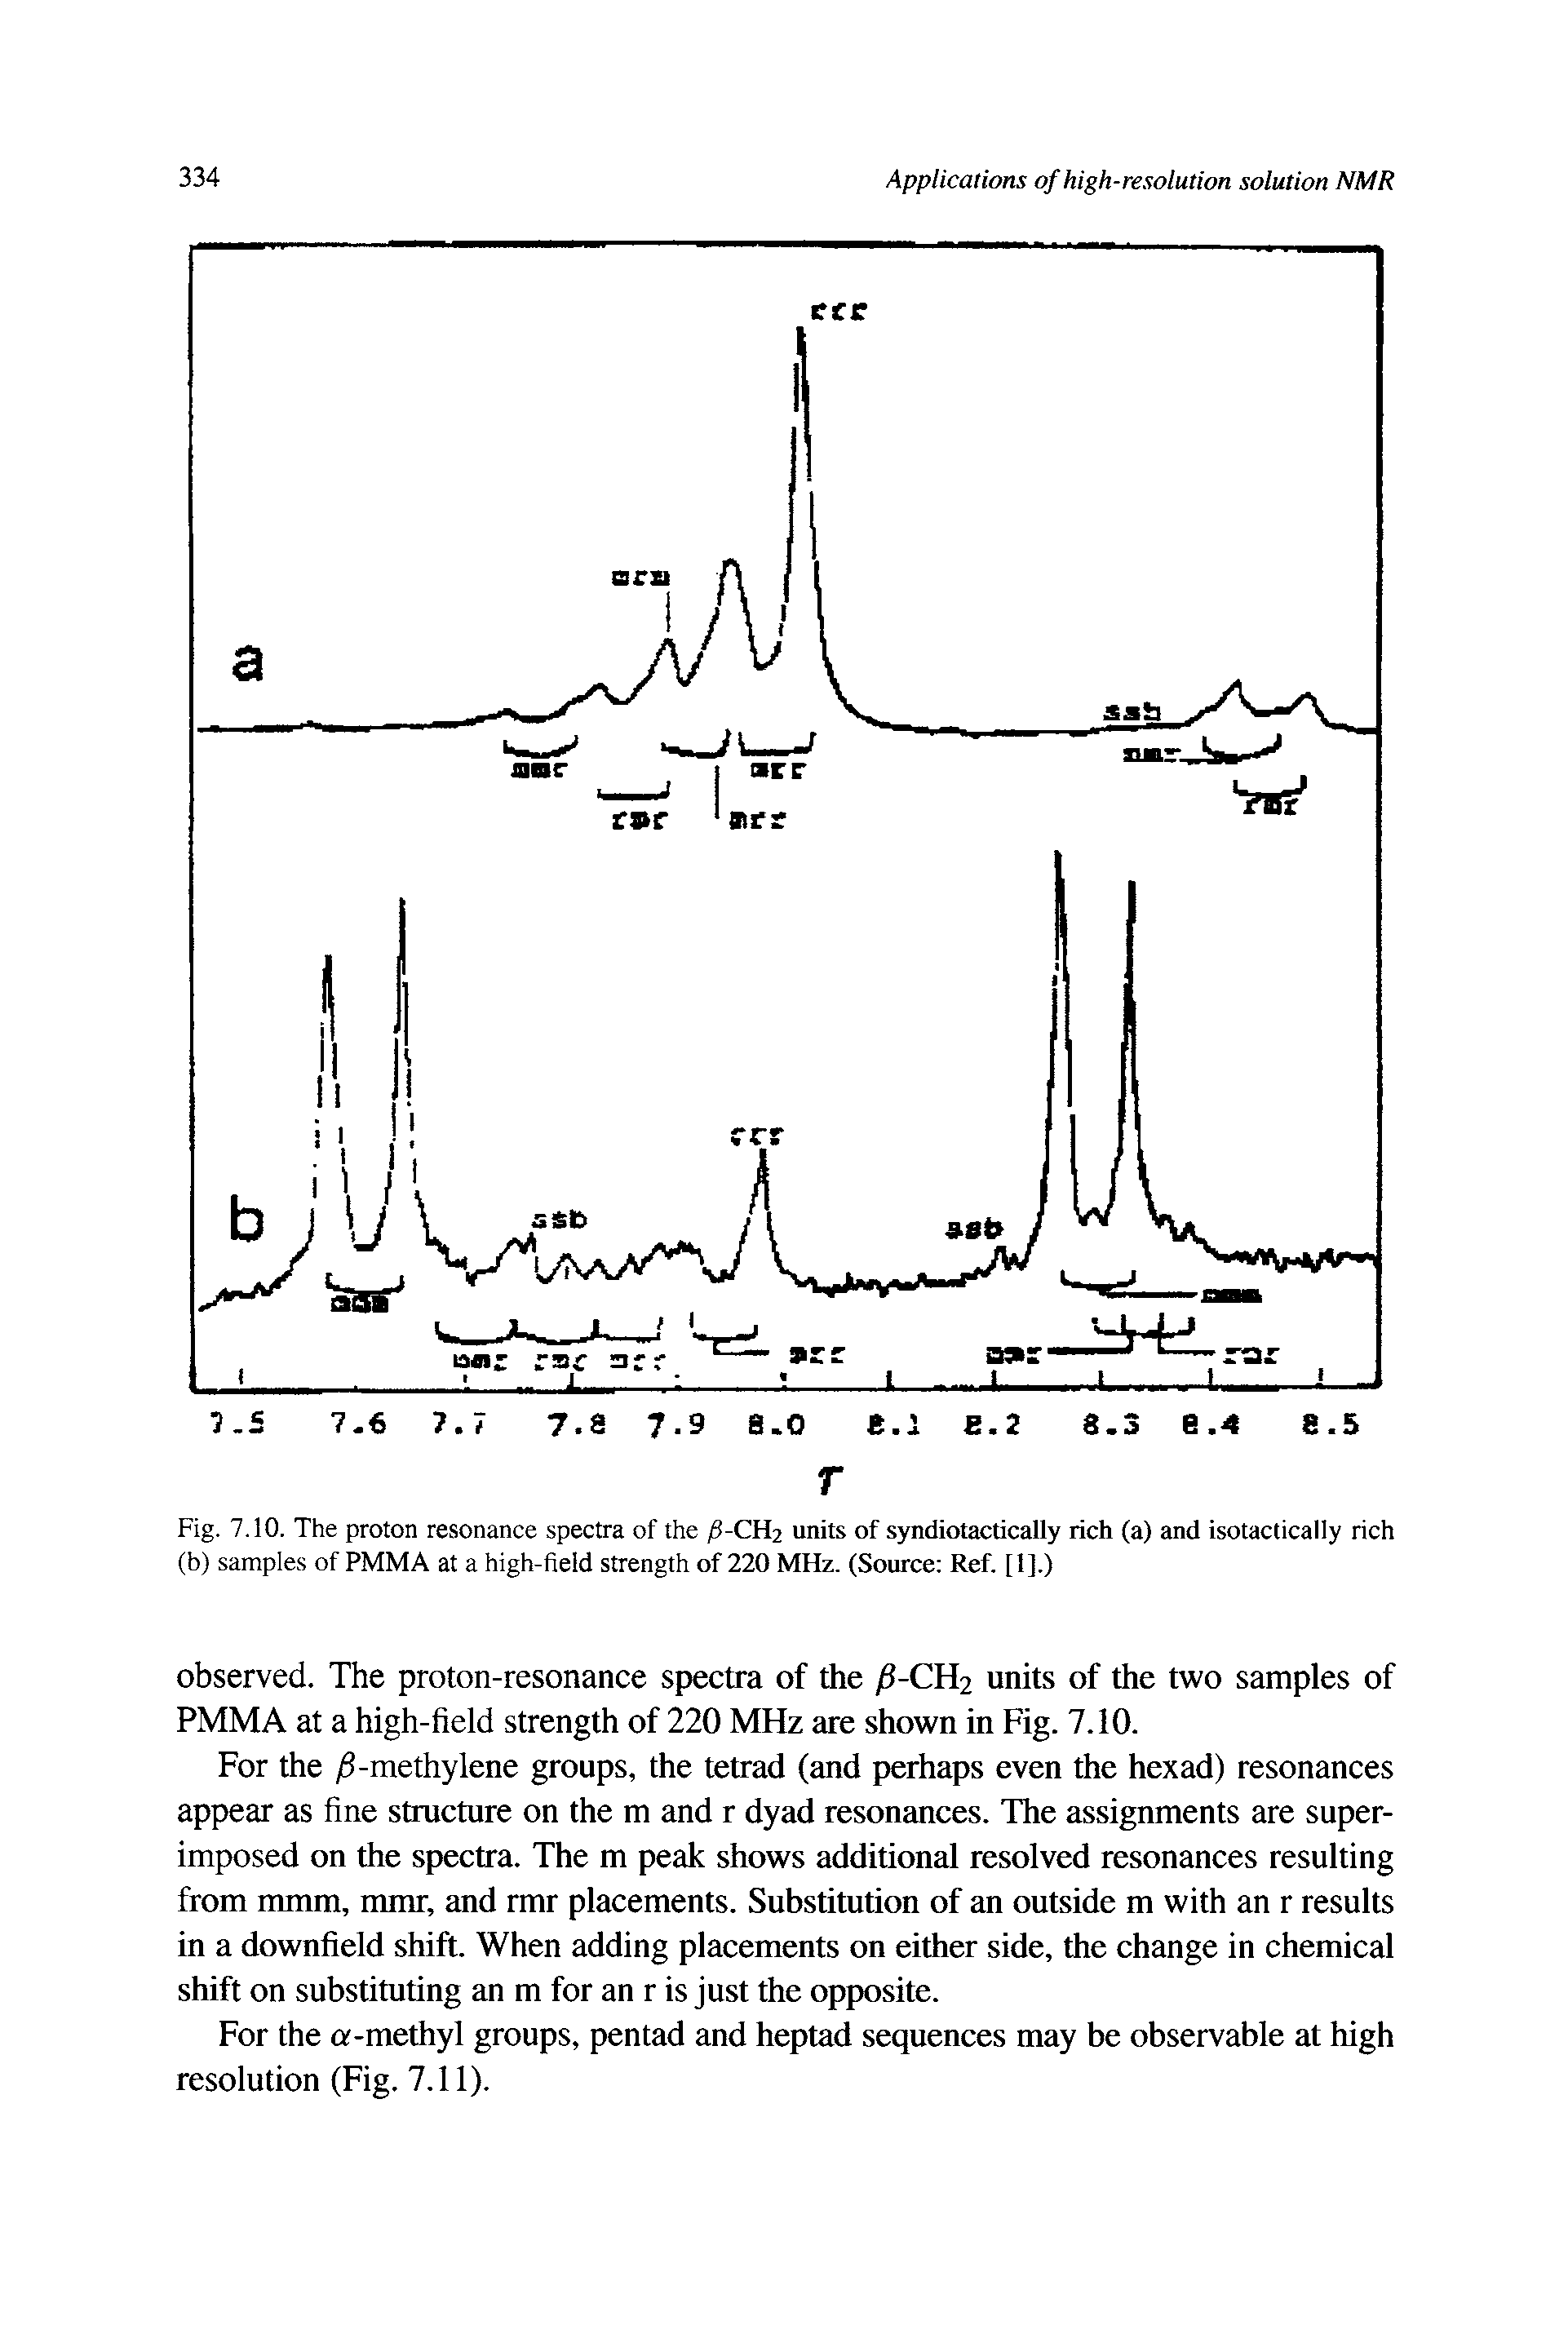 Fig. 7.10. The proton resonance spectra of the fi-CHj units of syndiotactically rich (a) and isotactically rich (b) samples of PMMA at a high-field strength of 220 MHz. (Source Ref. [ 1 ].)...